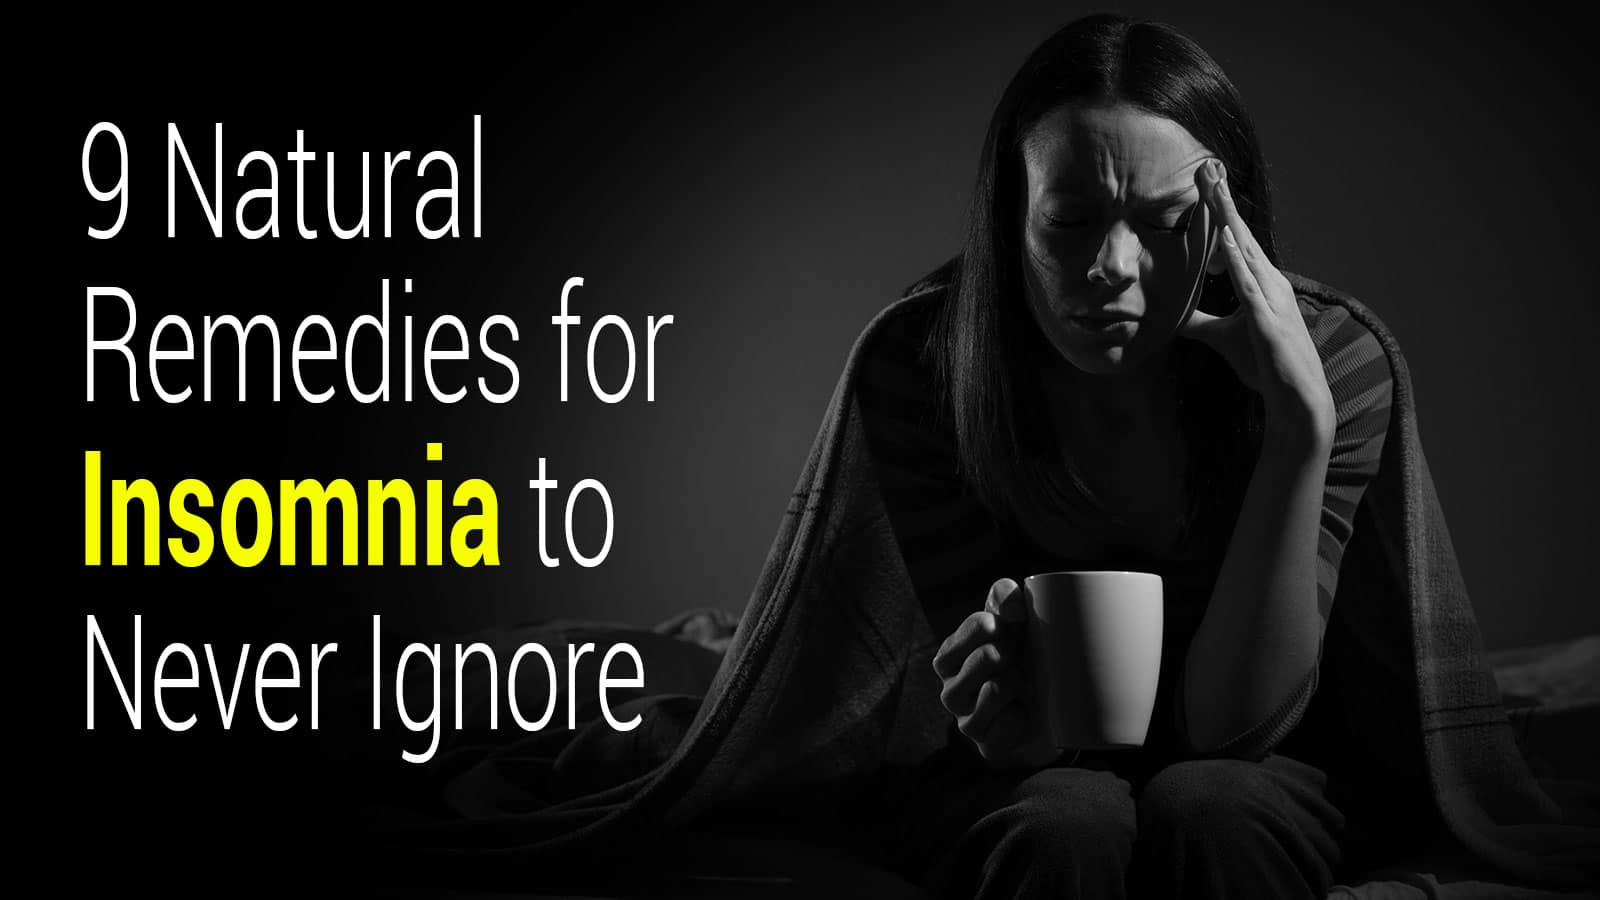 9 Natural Remedies for Insomnia to Never Ignore